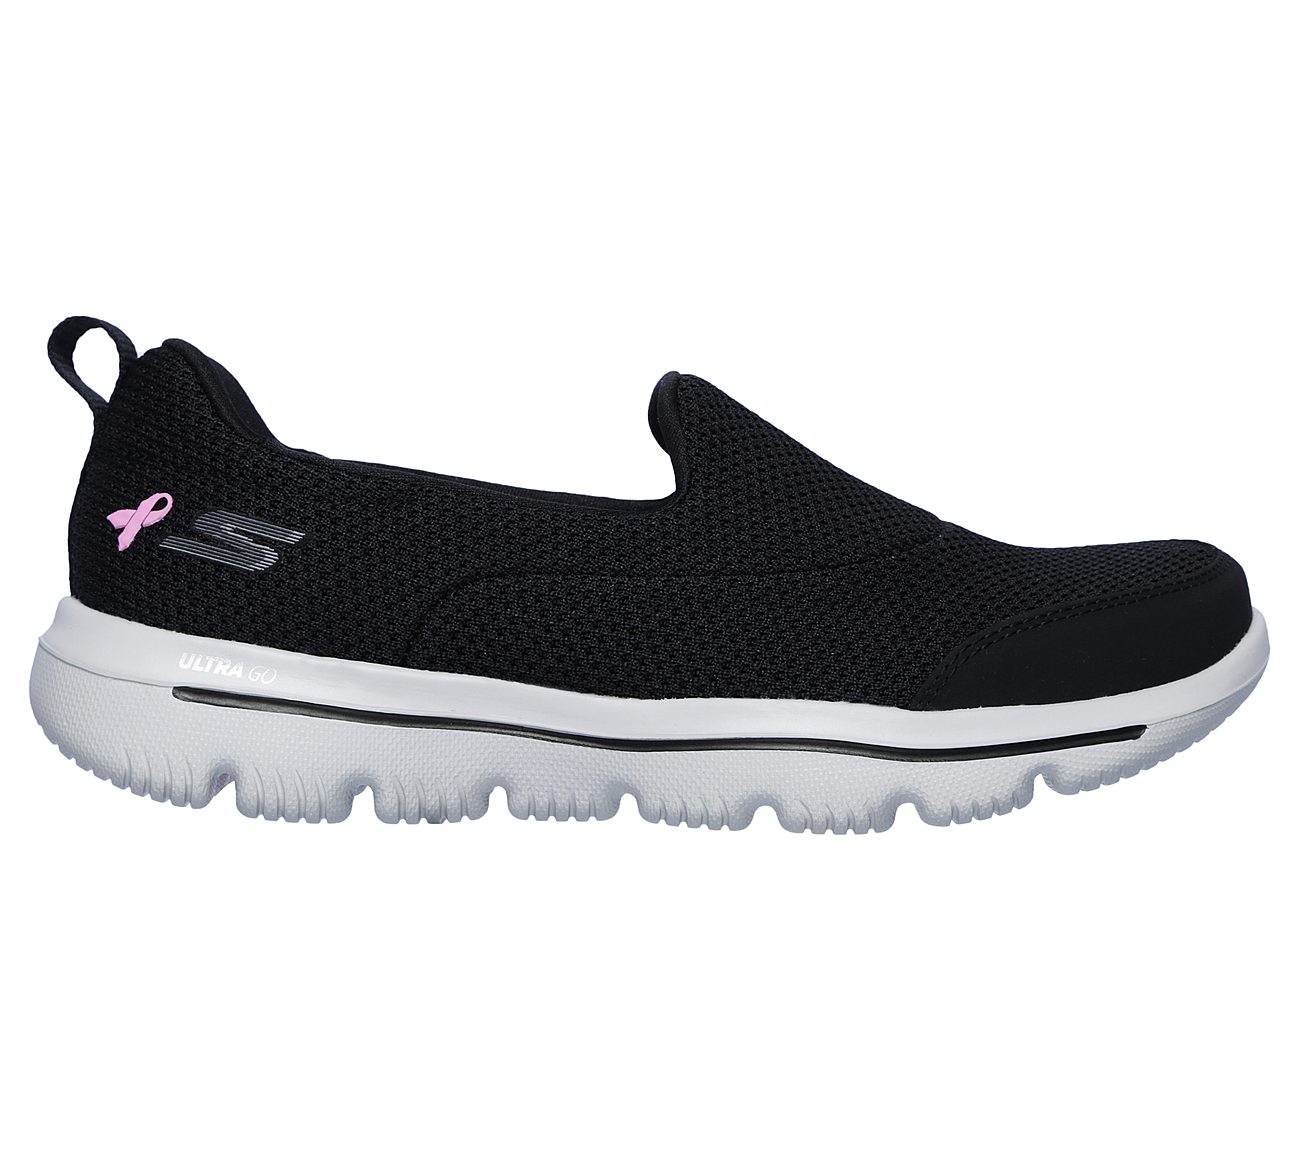 skechers go walk breast cancer shoes